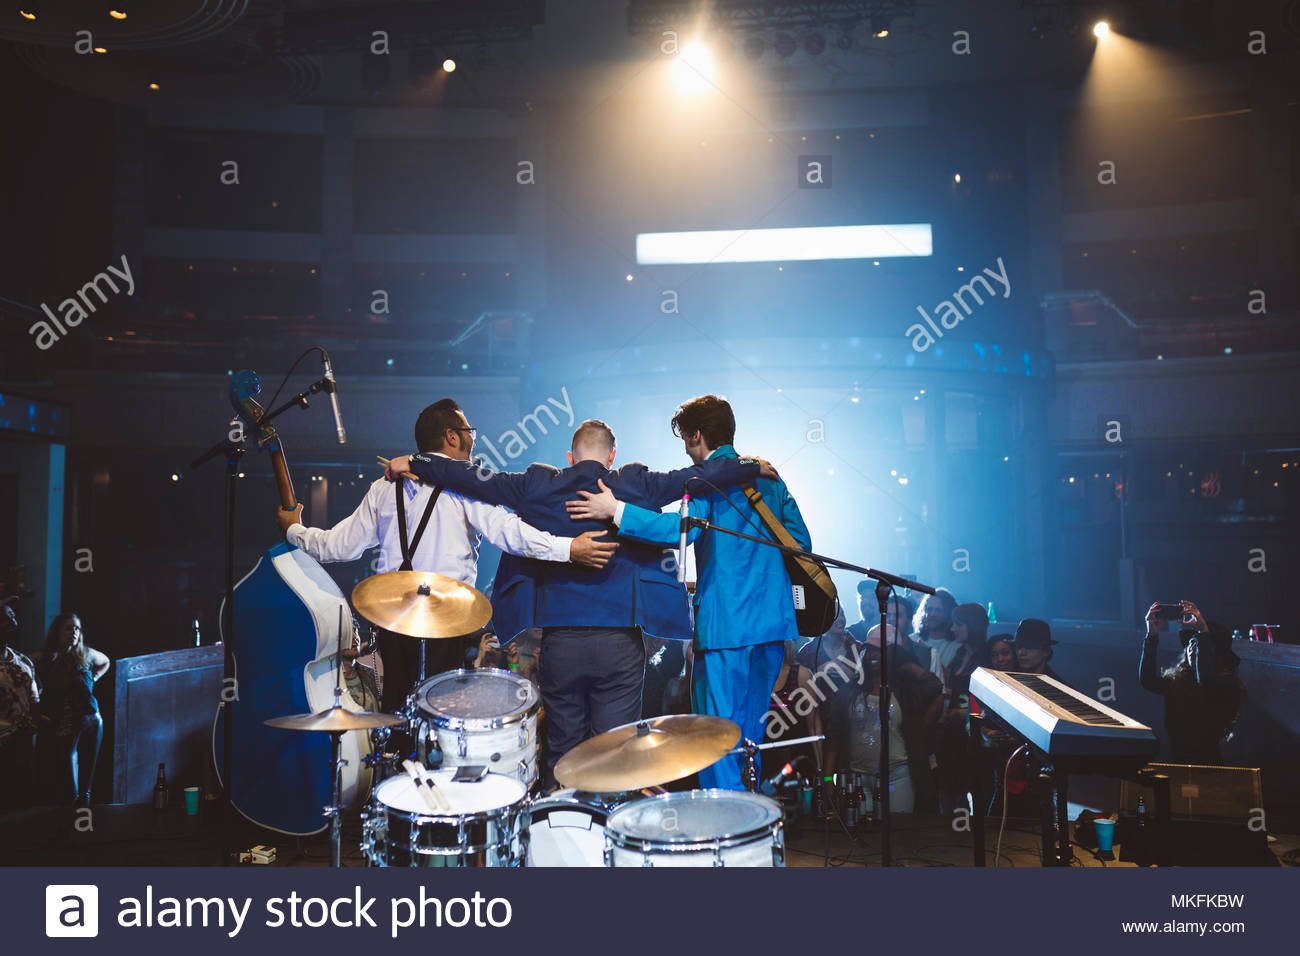 Rockabilly musicians taking a bow on stage at music concert Stock Photo